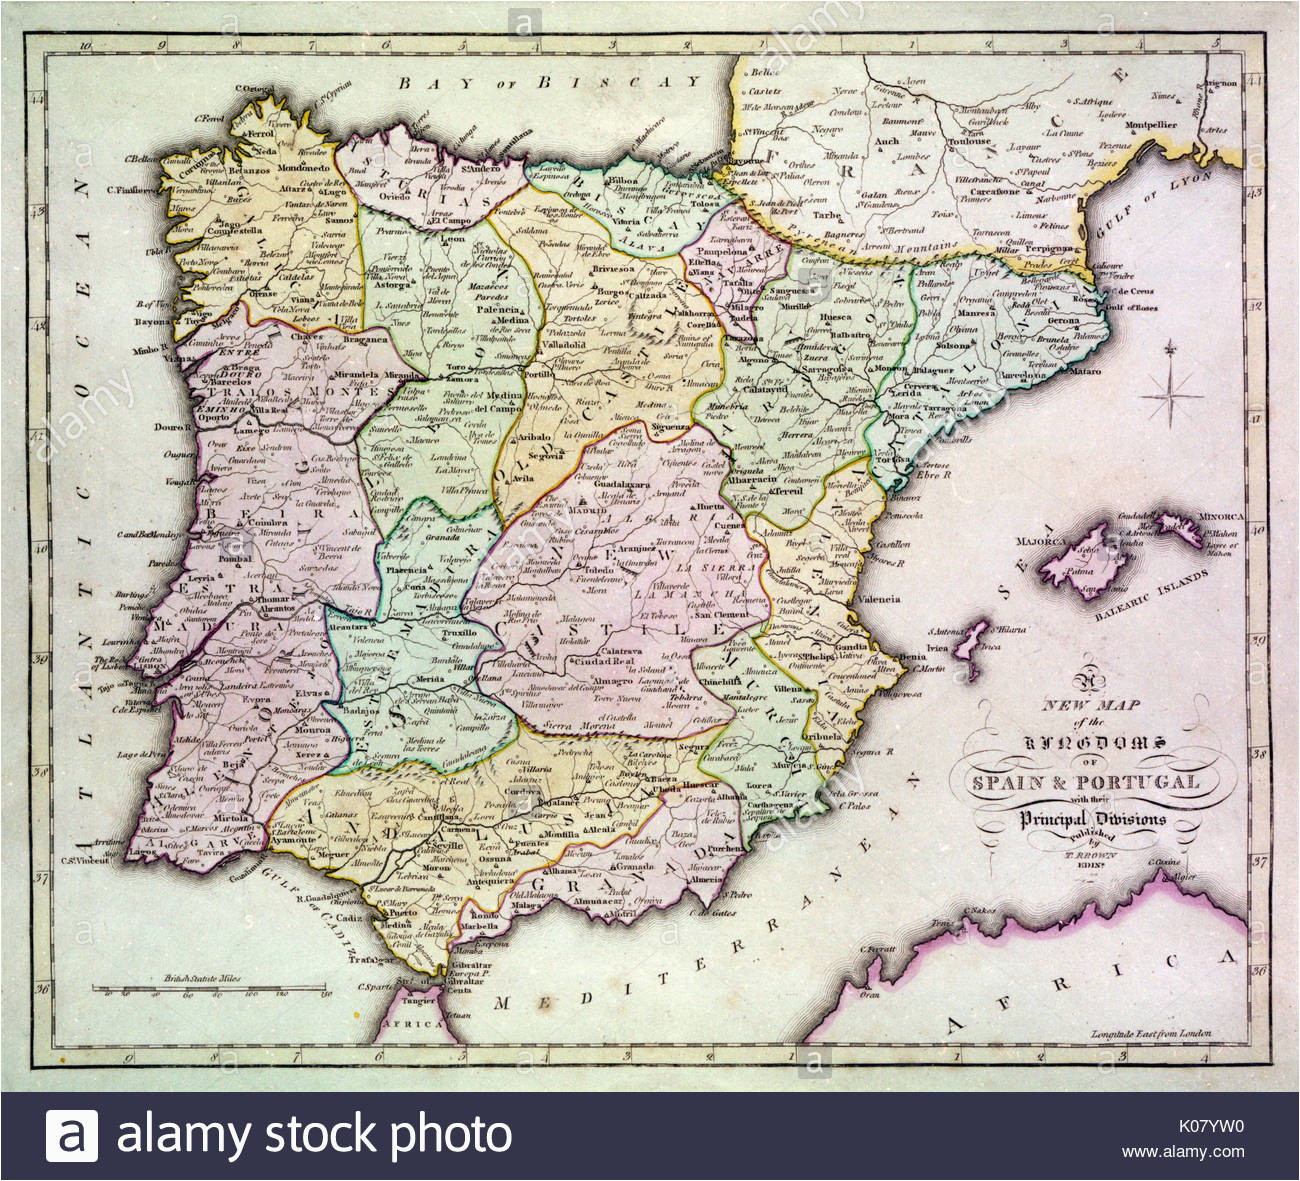 map of spain stock photos map of spain stock images alamy